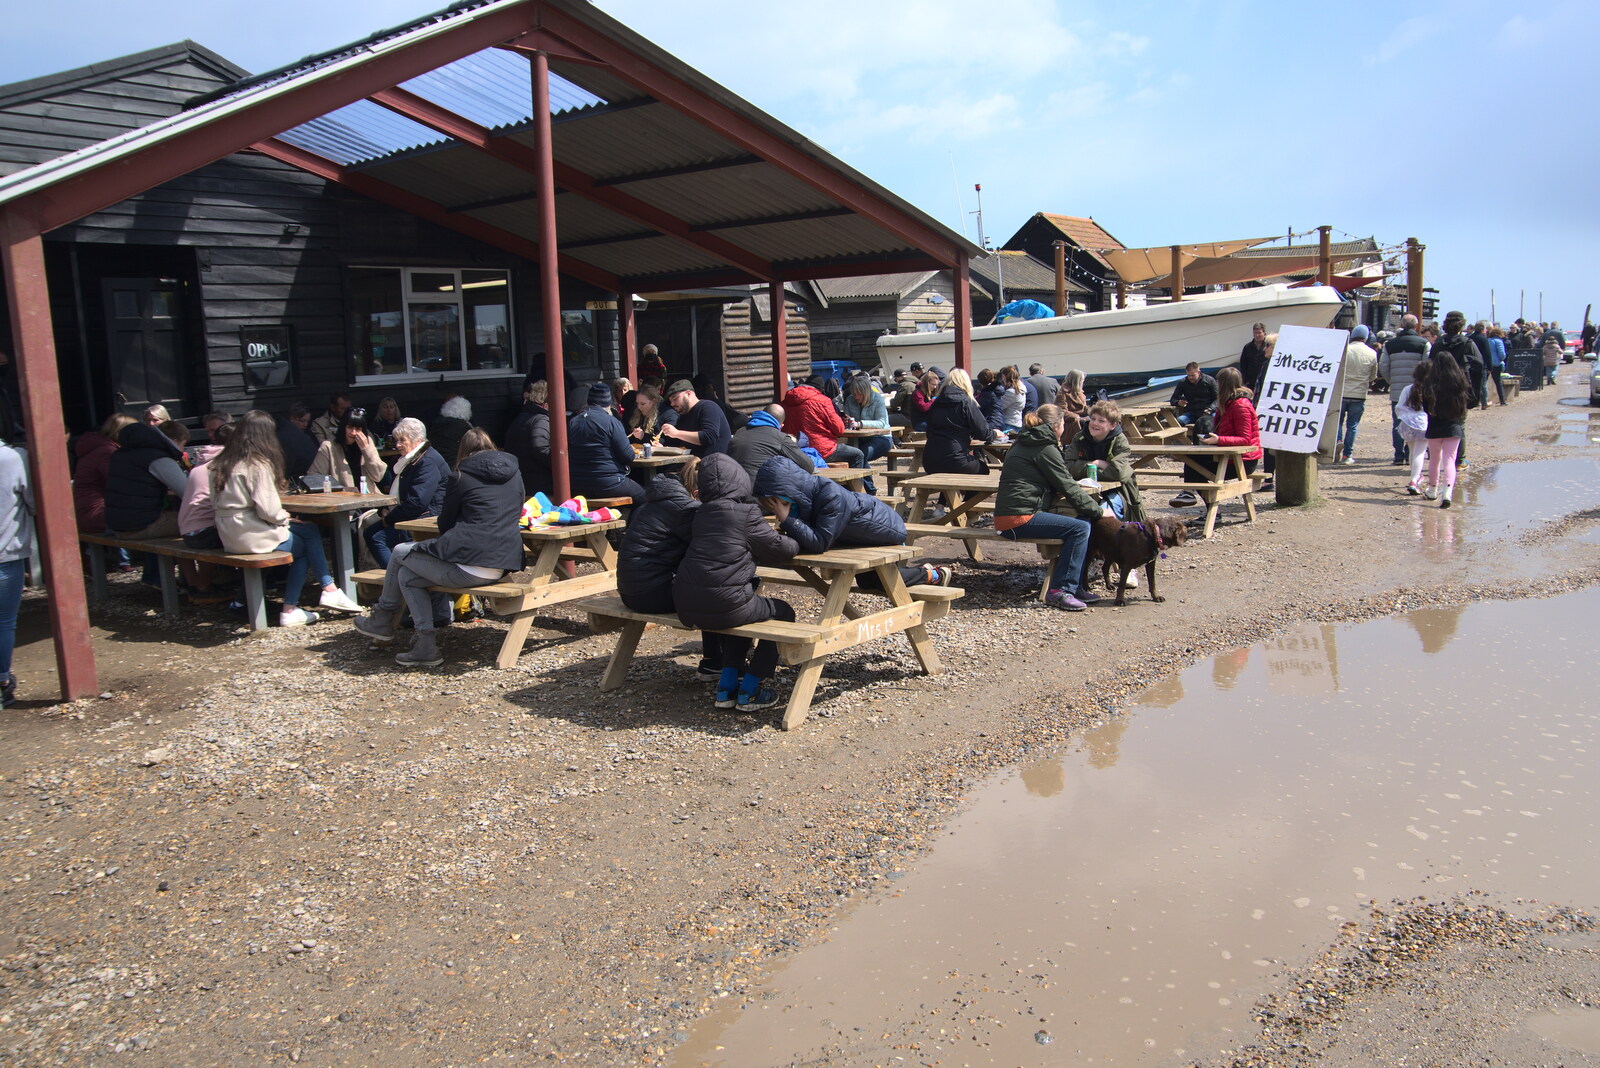 The New Normal outside Mrs T's from A Chilly Trip to the Beach, Southwold Harbour, Suffolk - 2nd May 2021